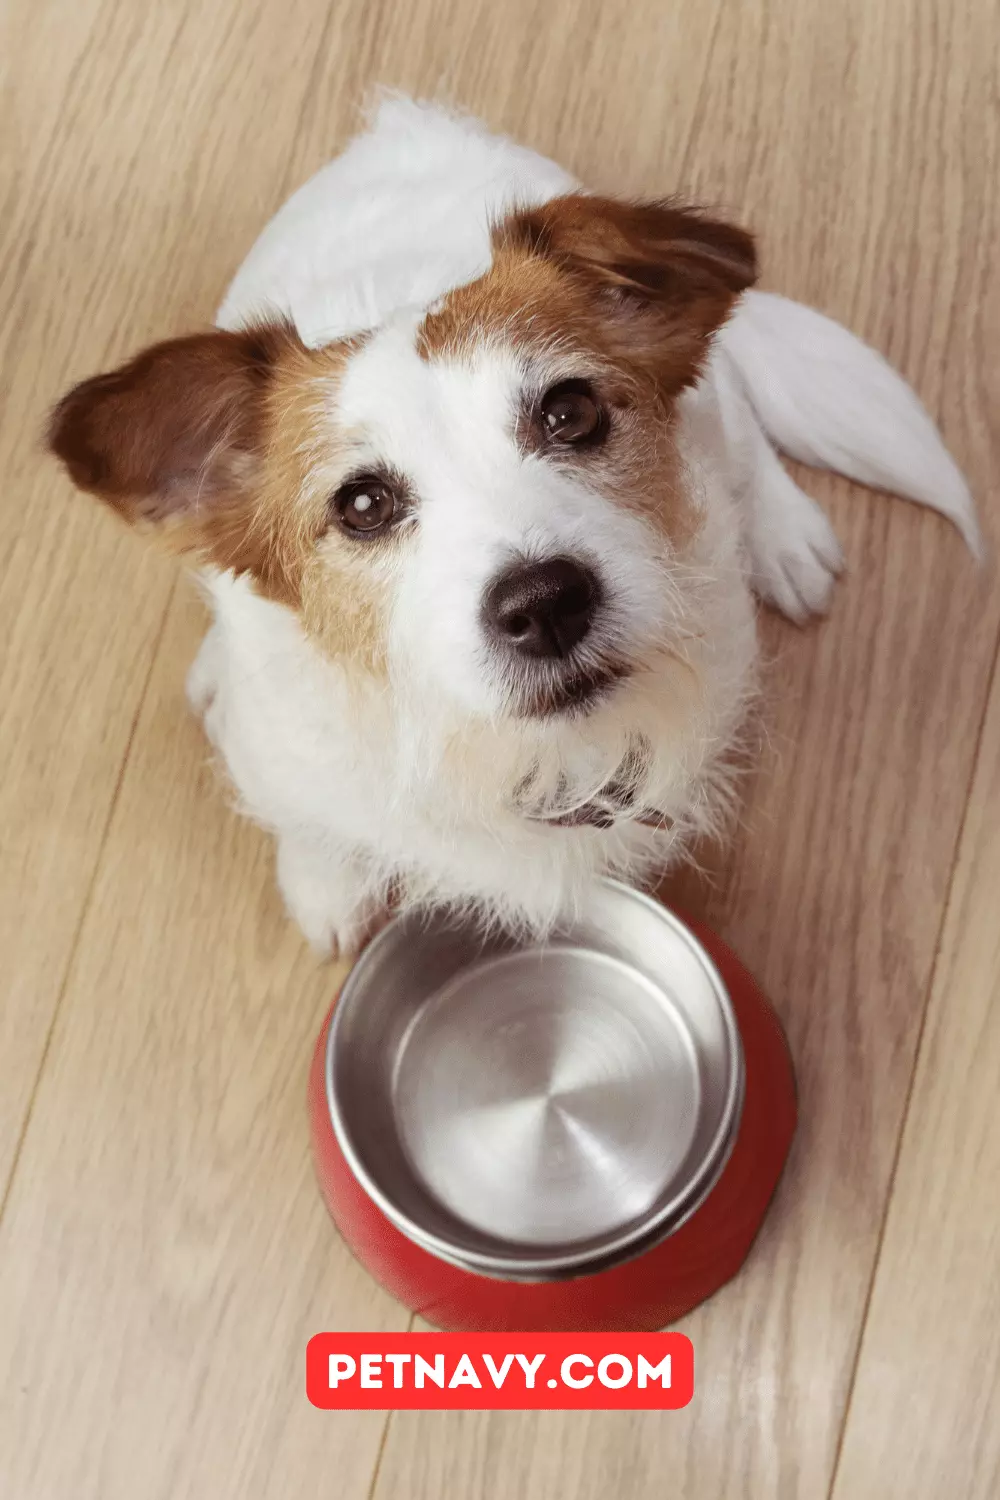 Hypoallergenic Dog Food Brands: Which is the Best of 2023?